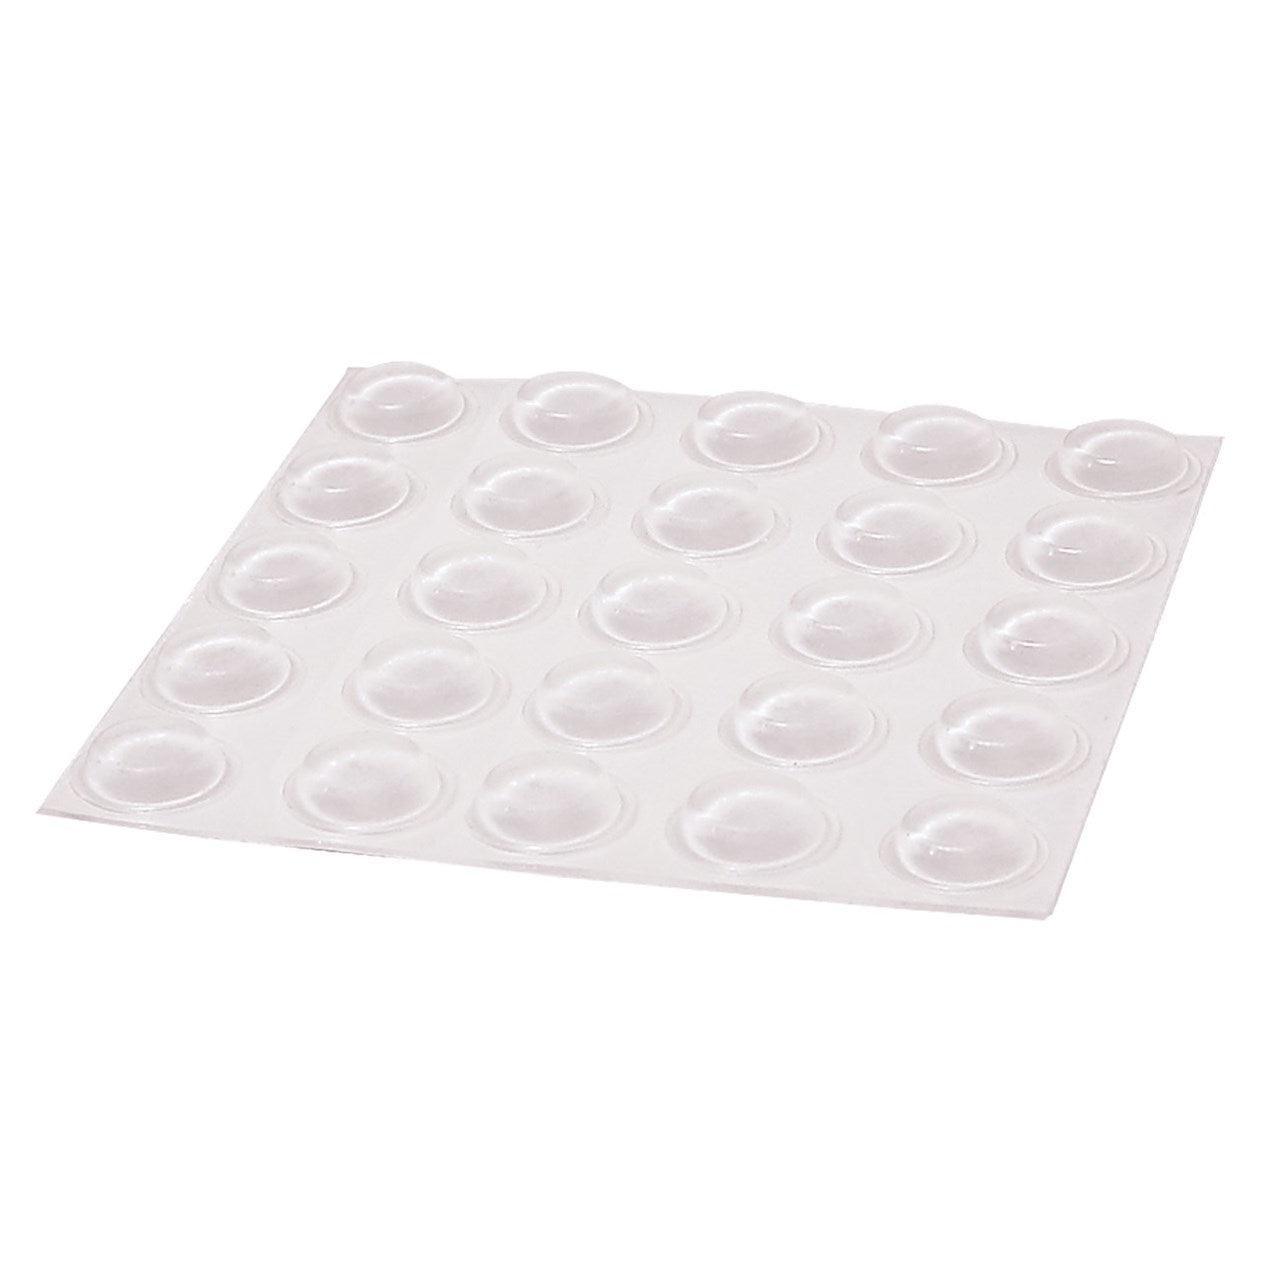 Clear Bump Dots Medium Flat-Top Round Bump Dots - The Low Vision Store